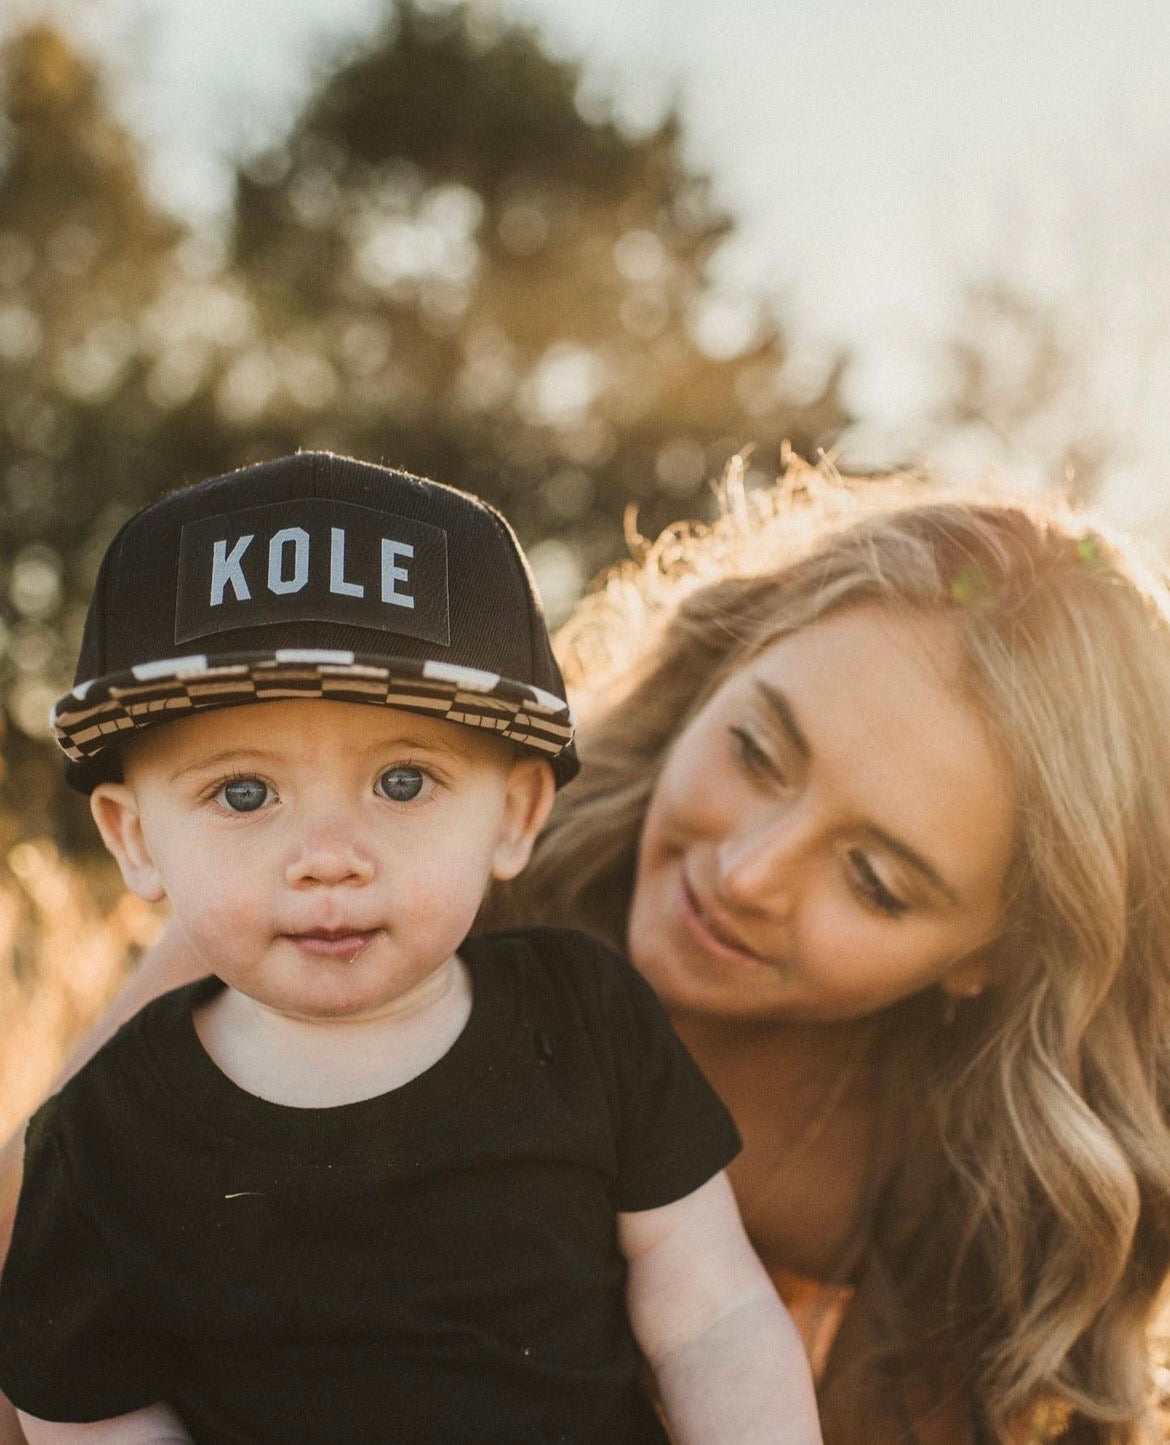 KASH (Leather Custom Name Patch) - Kids Trucker Hat (Black/Checkered)